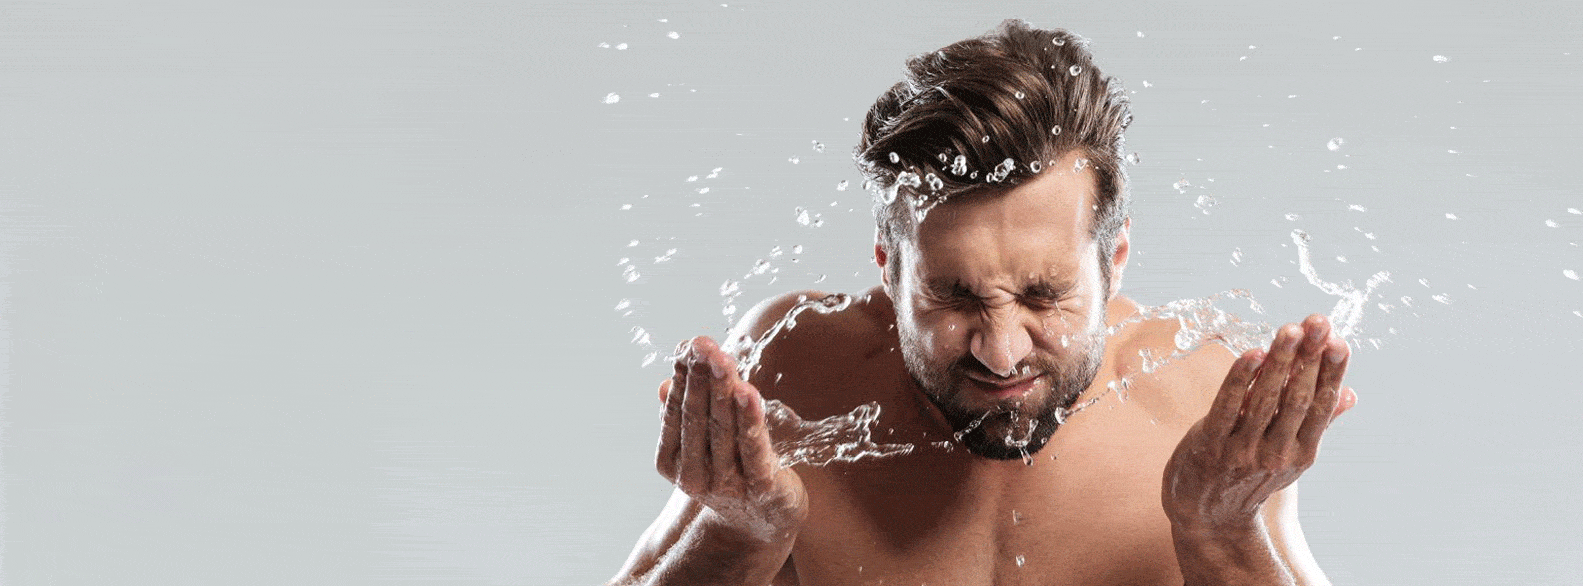 Men's Skin Care: How To Keep Your Skin Acne-Free